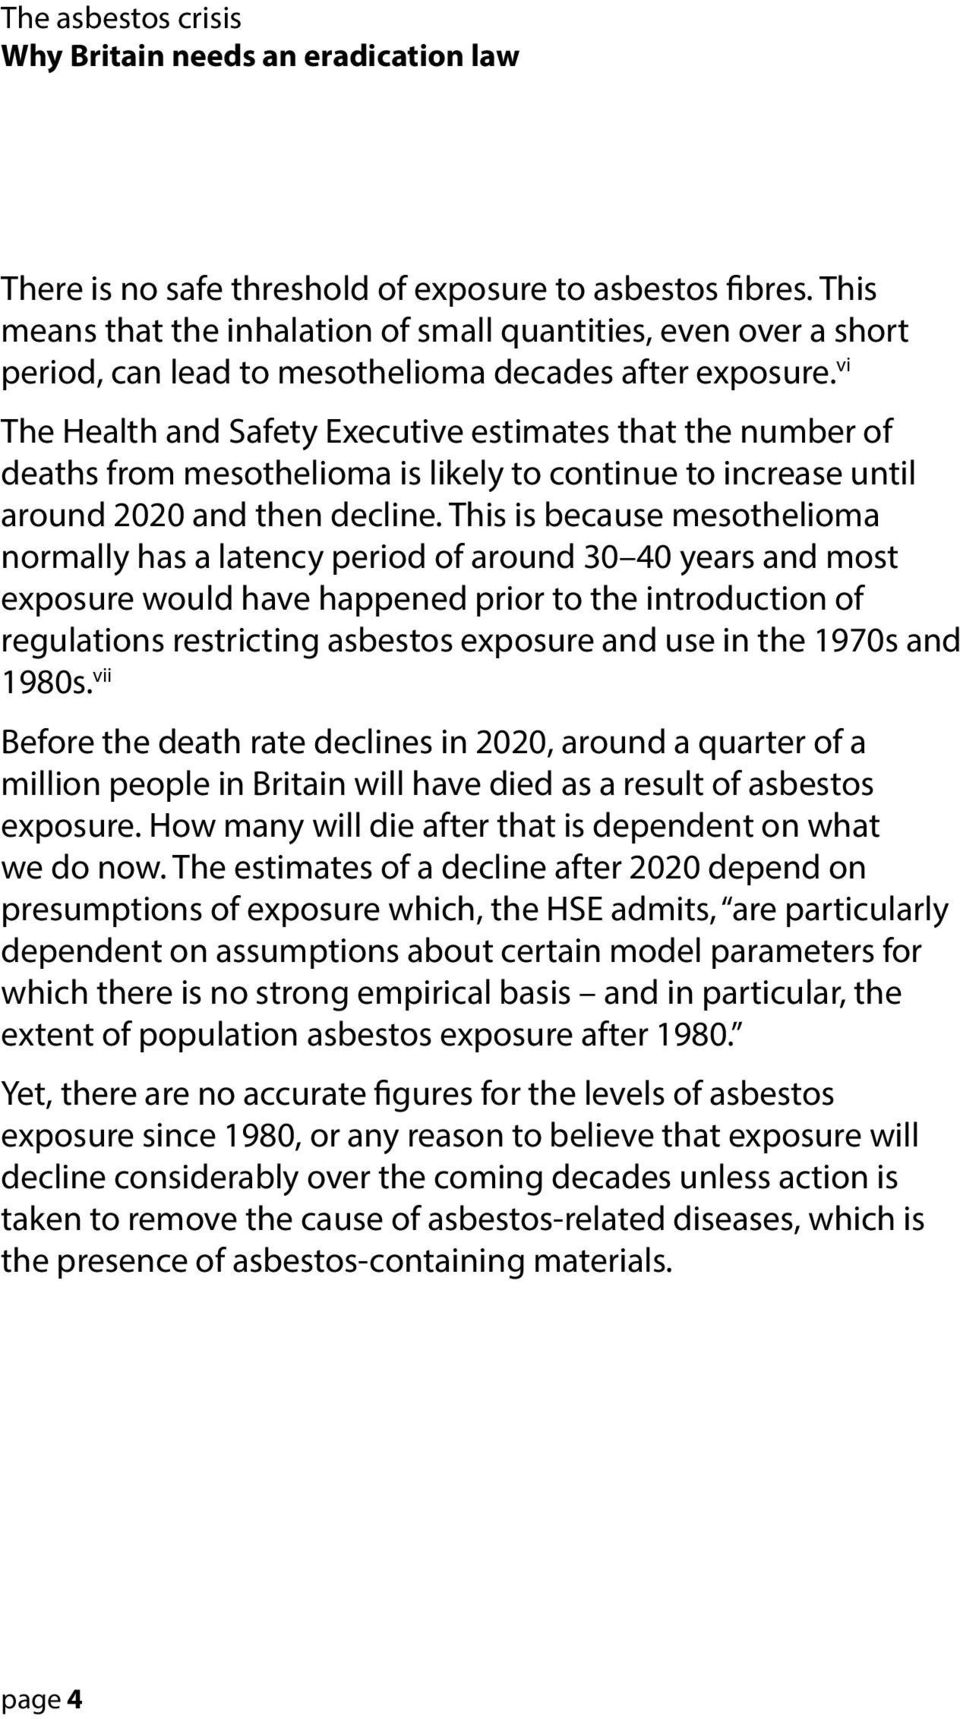 This is because mesothelioma normally has a latency period of around 30 40 years and most exposure would have happened prior to the introduction of regulations restricting asbestos exposure and use